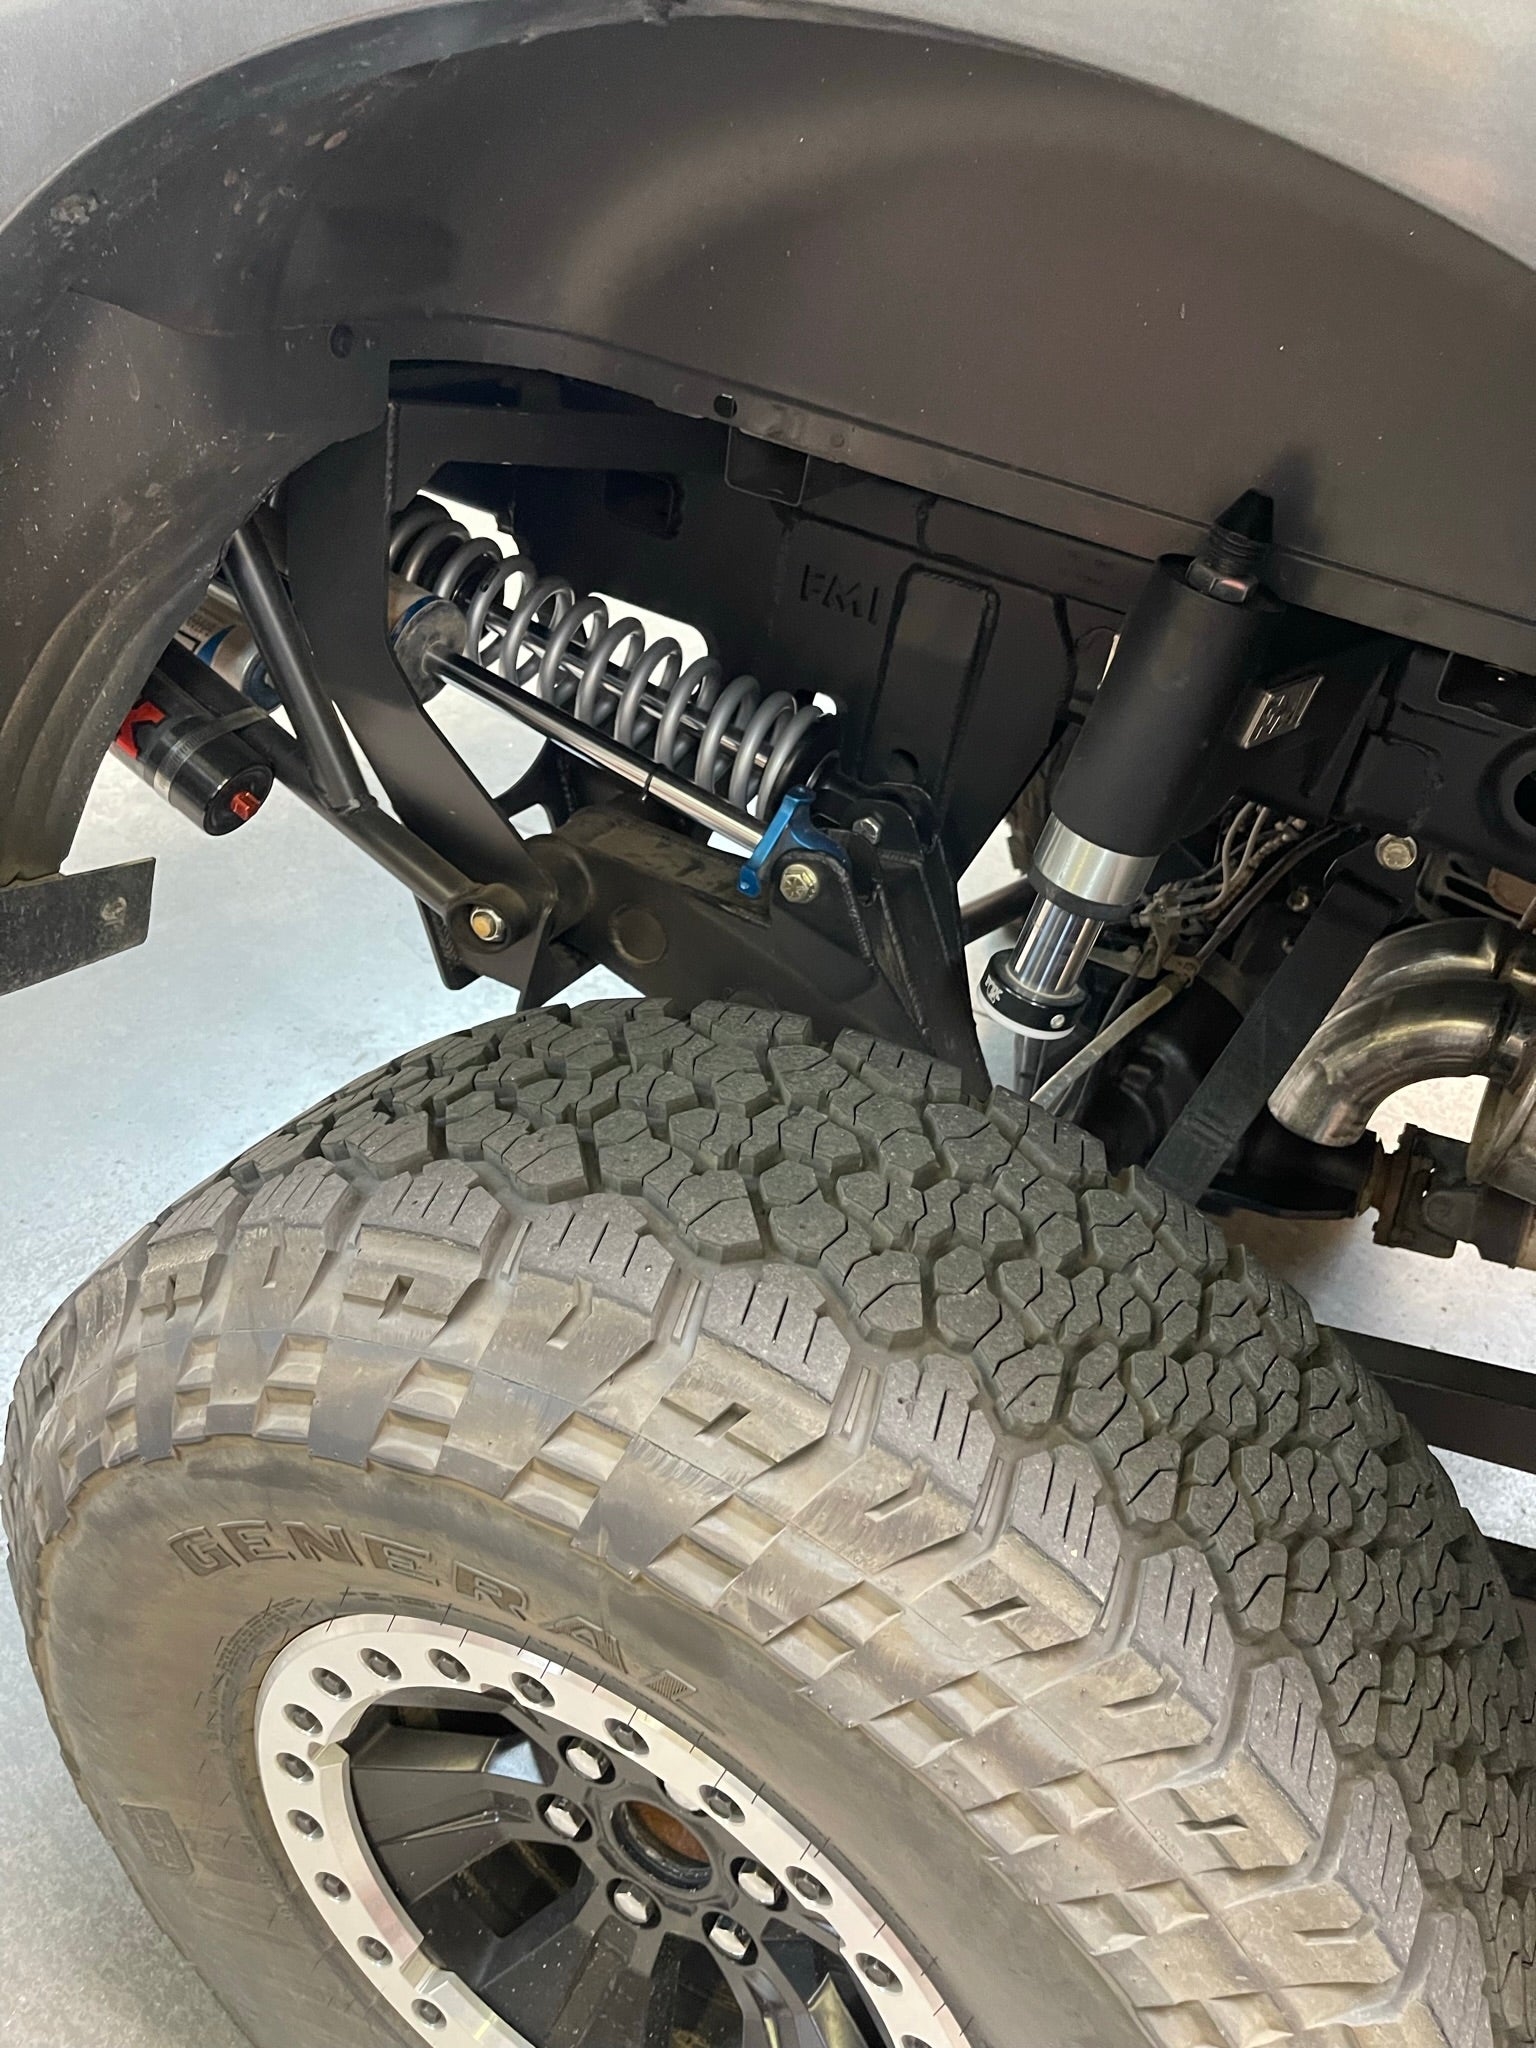 Raptor 5 link rear suspension kit with canitleaver provides over 19" of wheel travel in the rear.  Uses the stock live valve shocks or you can upgrade to a full 3" external bypass too.  The kit has a 12" coil over shock for the main spring to allow any spring rates you can imagine